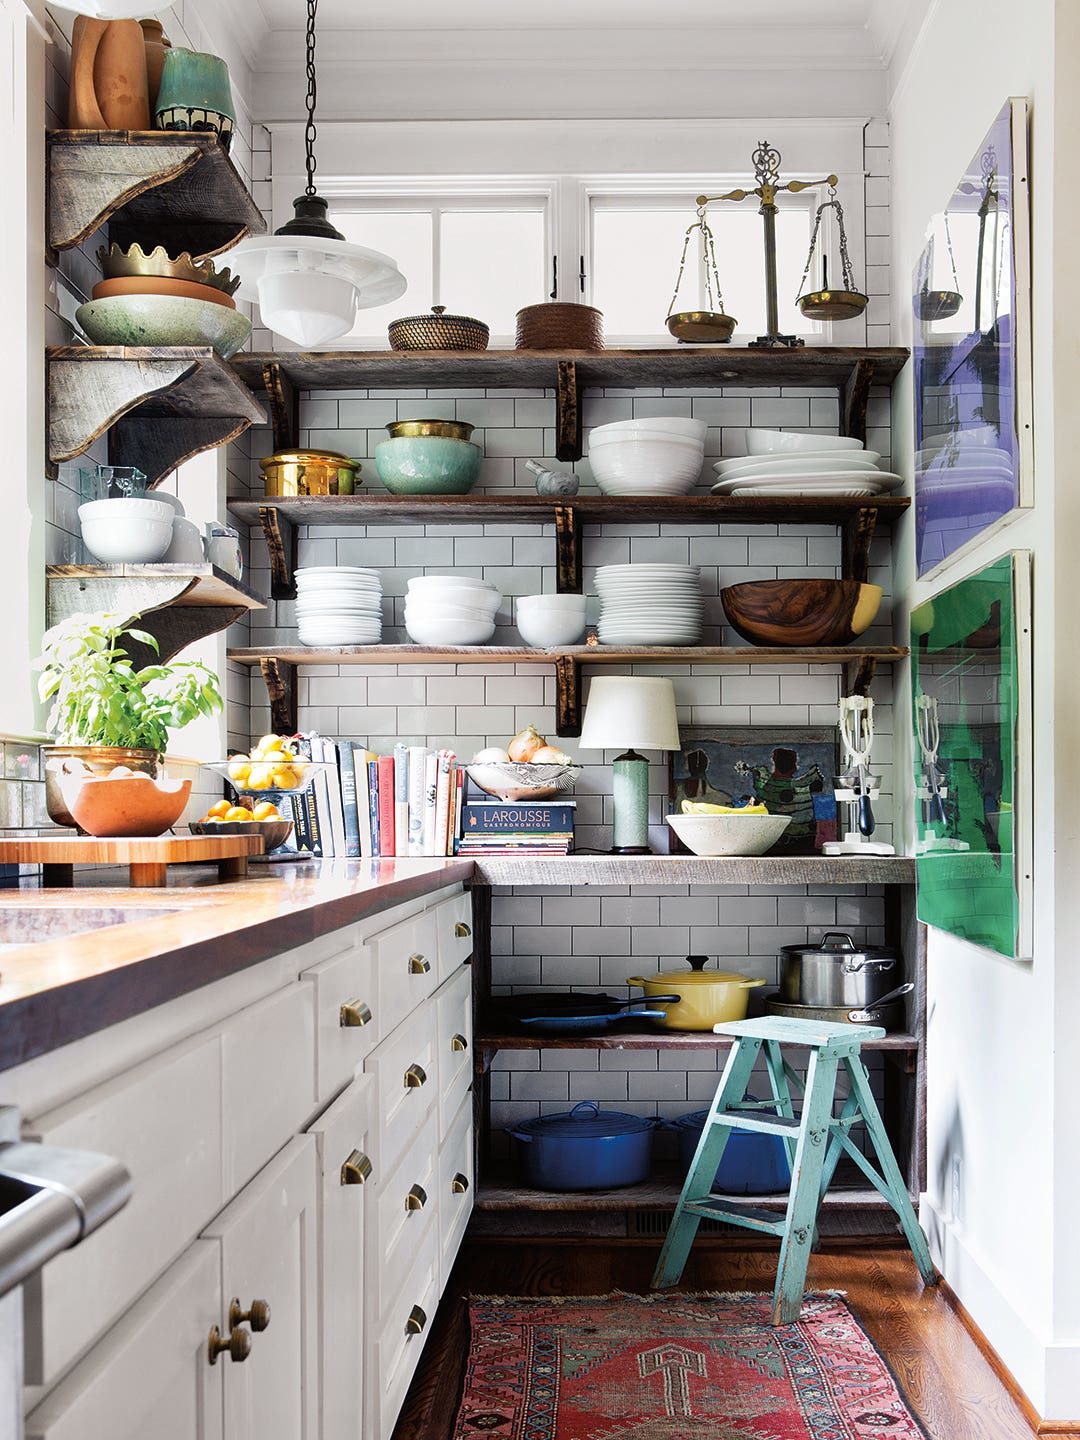 Organized kitchen with open shelving